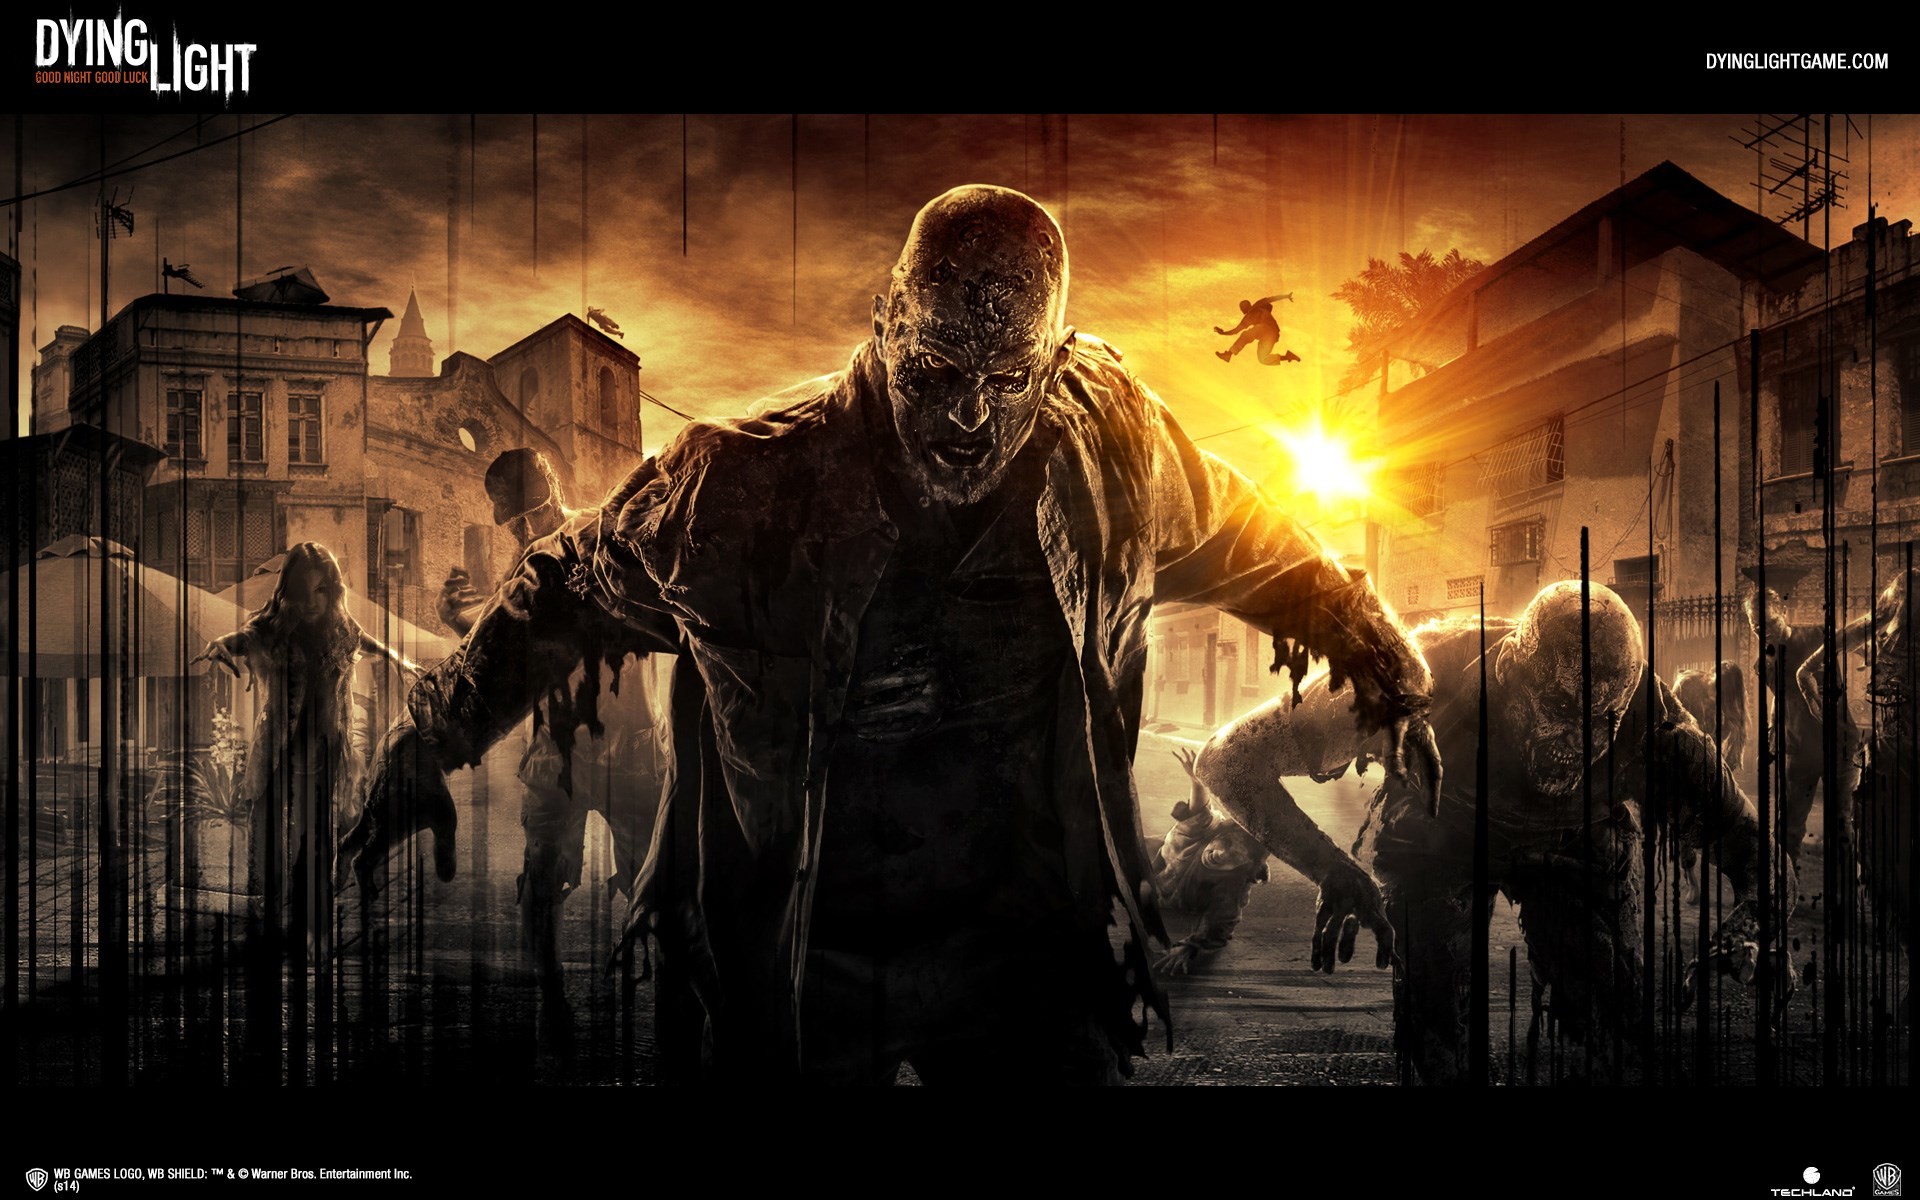 1920x1200 free desktop backgrounds for dying light